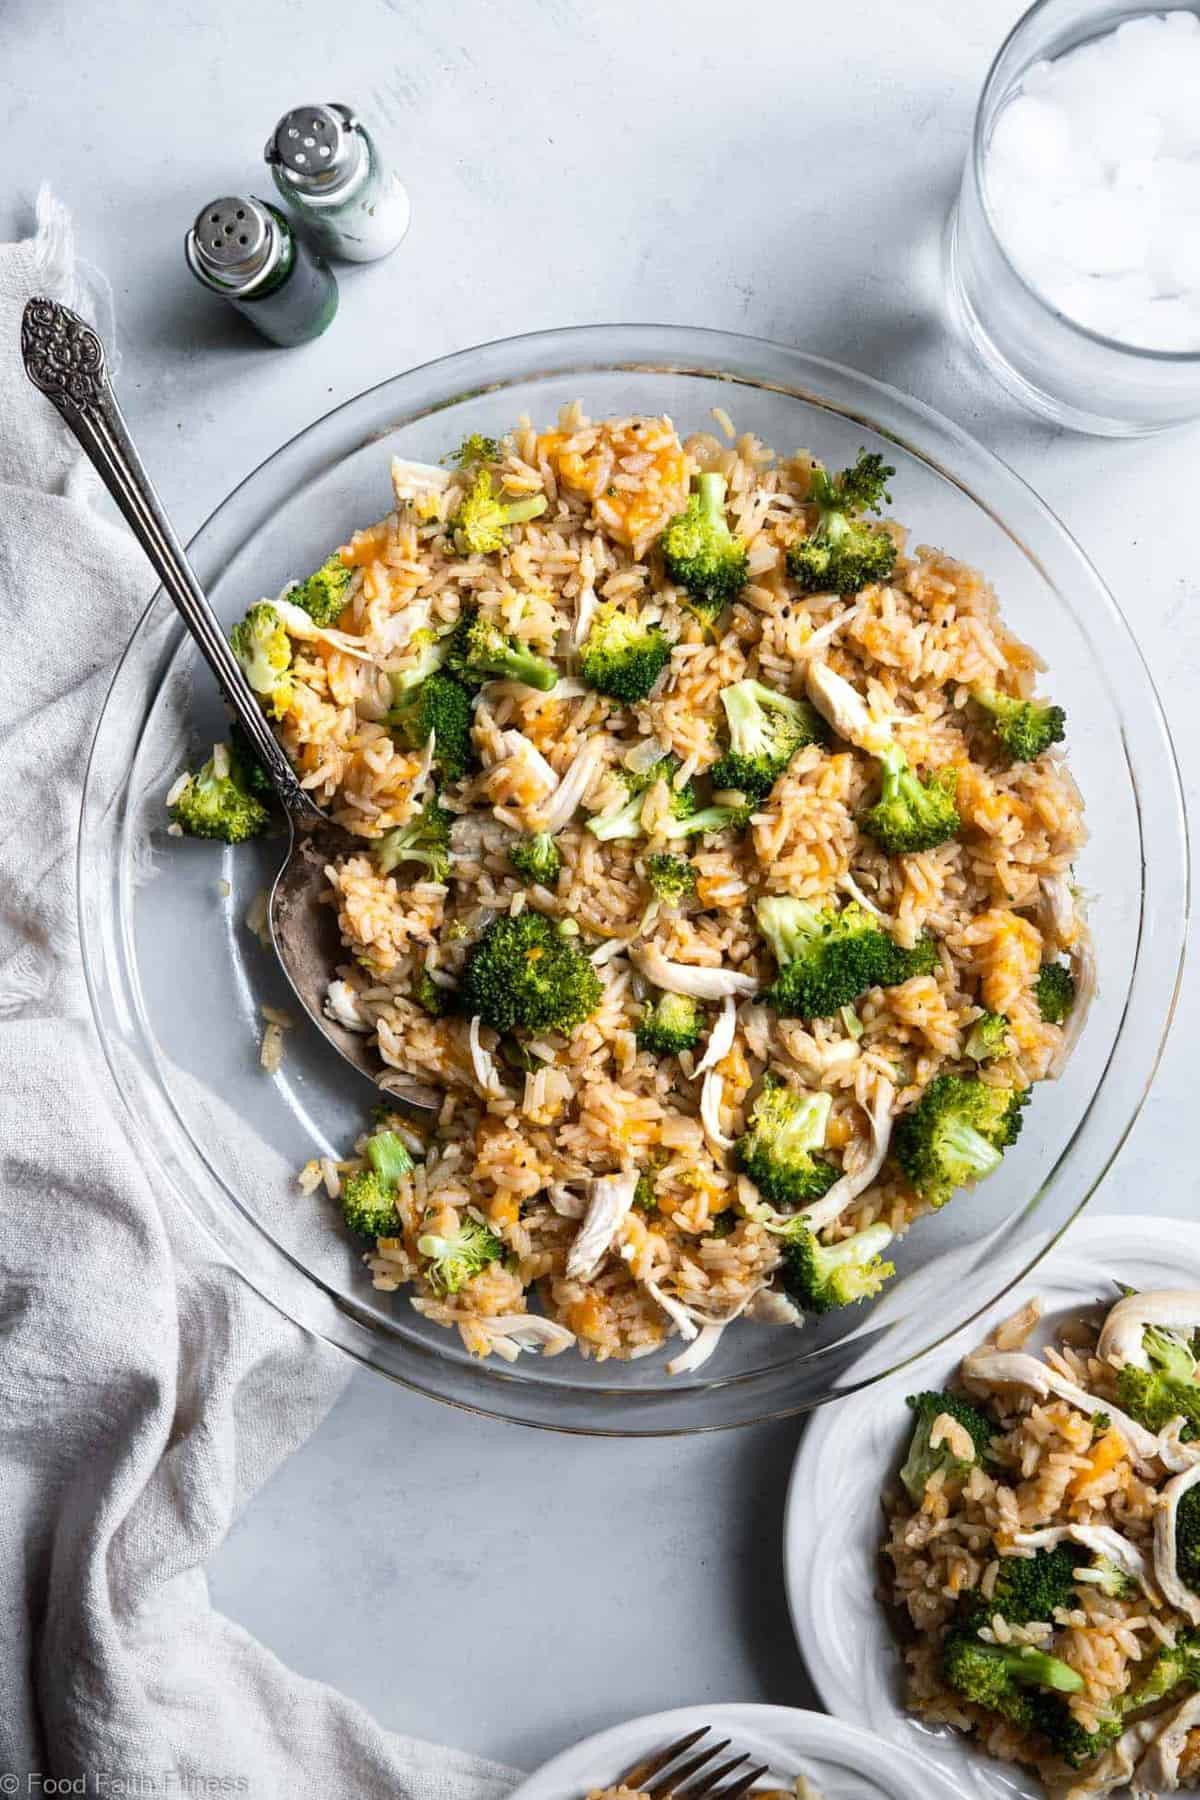 Instant Pot Broccoli Cheese and Chicken Rice Casserole - This gluten free Instant Pot chicken rice casserole with broccoli is an easy, weeknight dinner that almost makes itself! Even picky kids will love it and great for meal prep! | #Foodfaithfitness | #healthy #glutenfree #Instantpot #dinner #kidfriendly